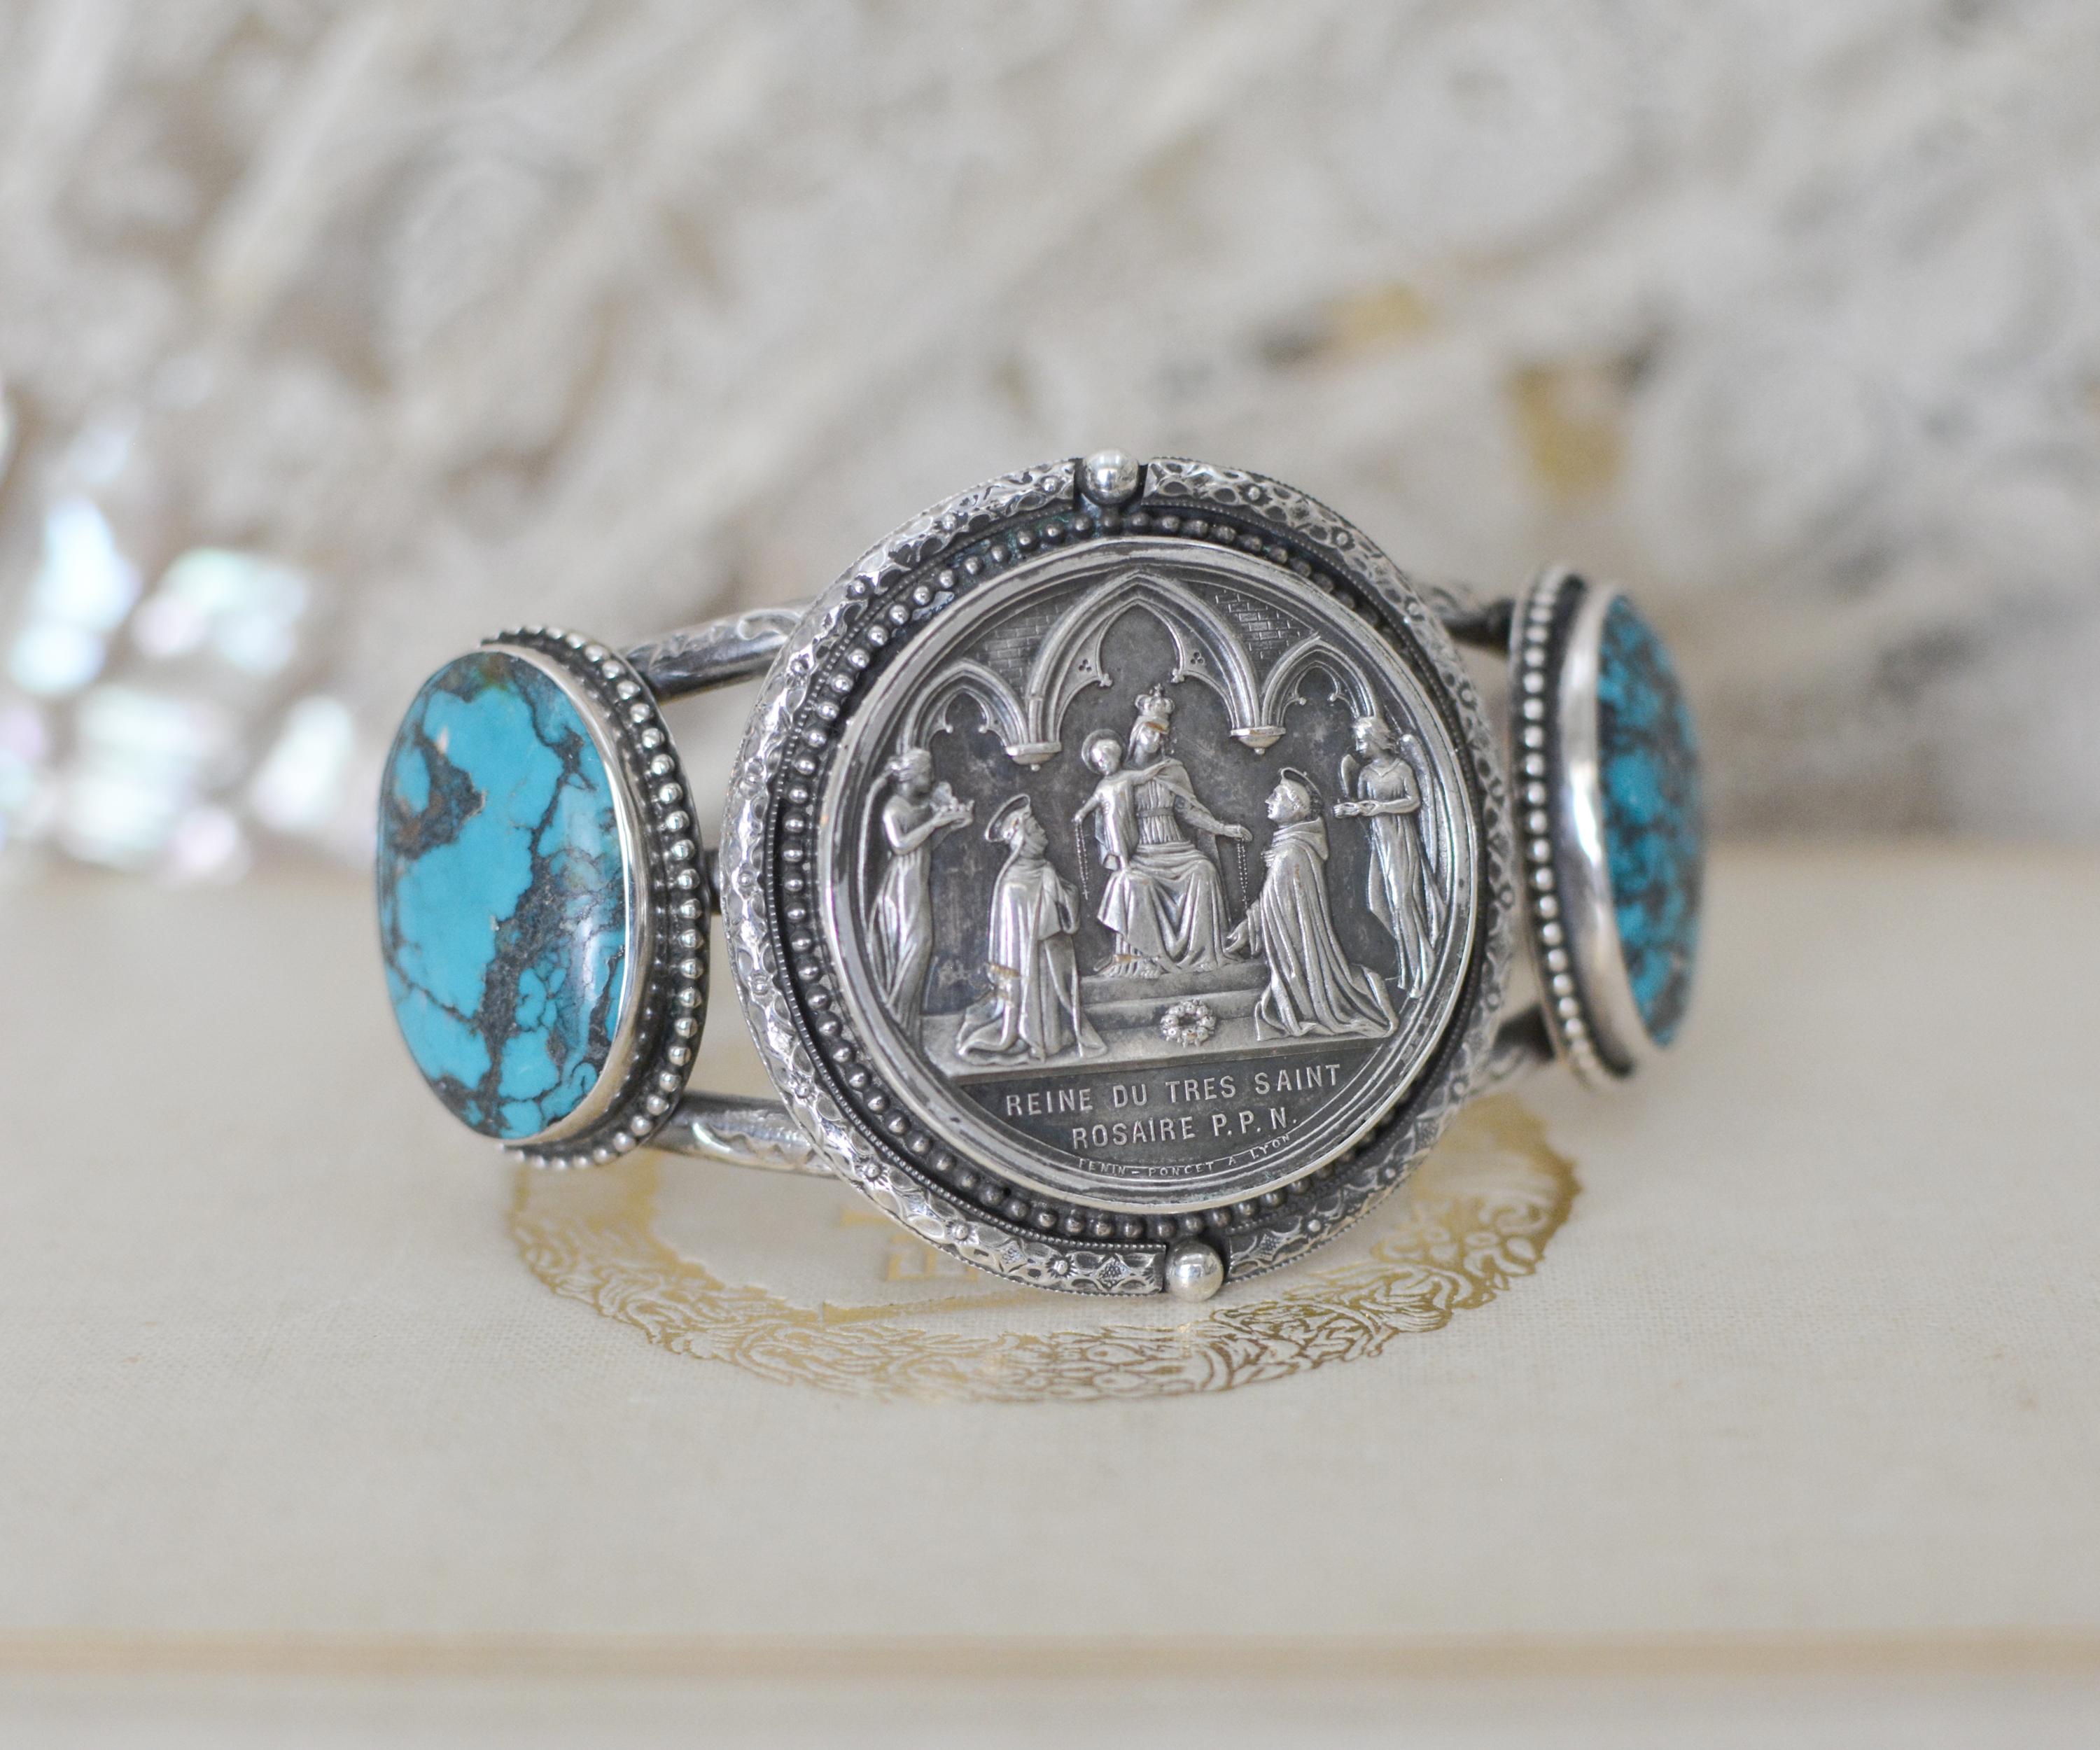 Baroque Jill Garber Antique French Wedding Medal with Turquoise Cuff Bracelet For Sale